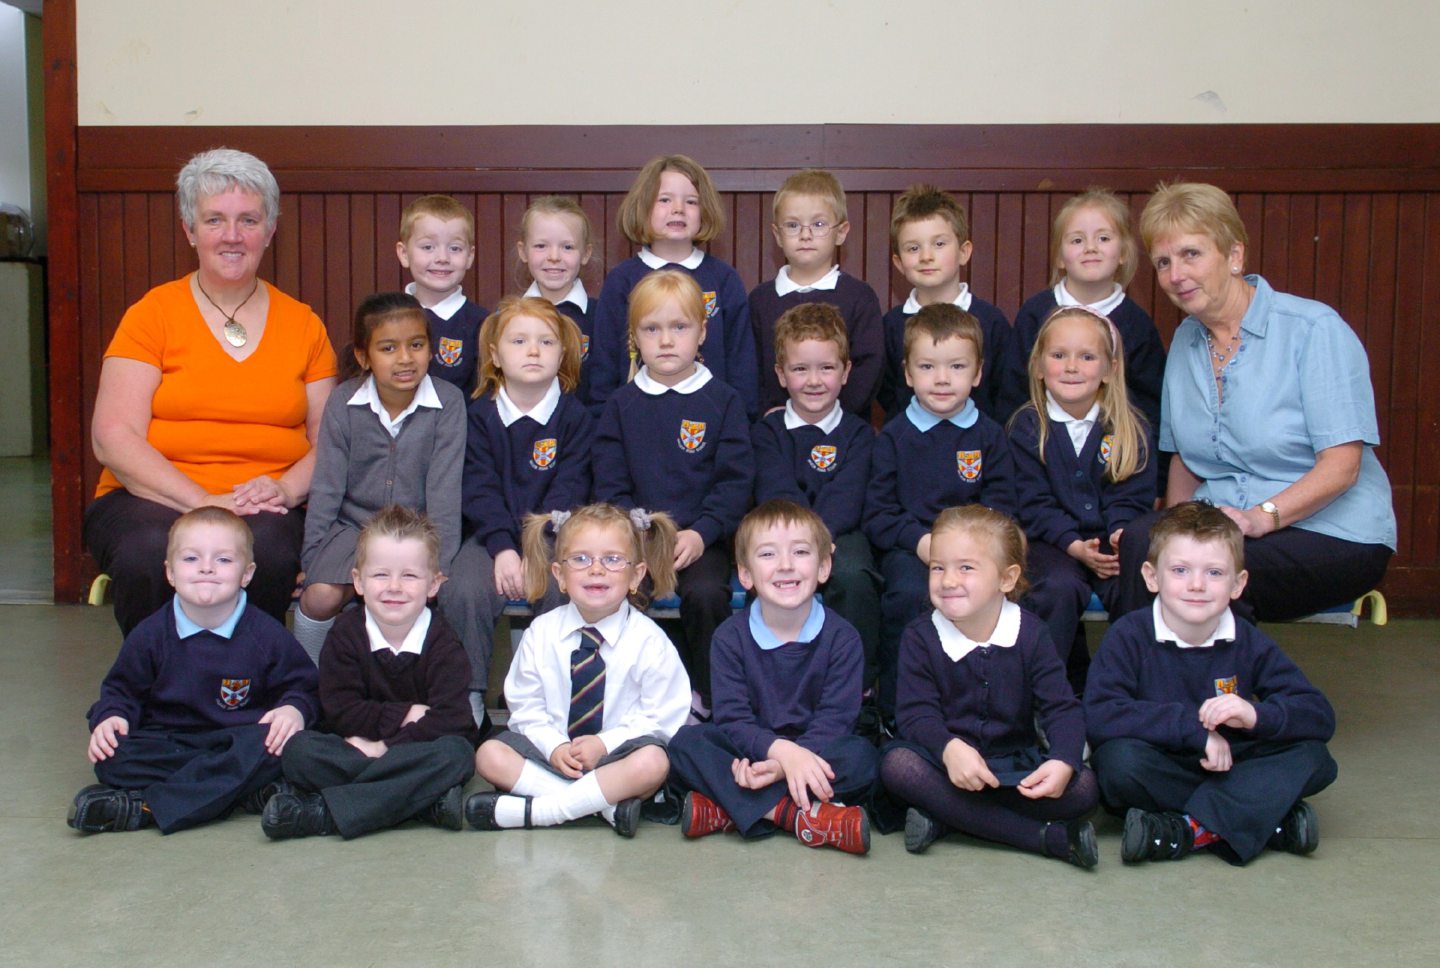 Pupil Support Assistant Pam Porter with teacher Maureen Fraser and their new P1 class in 2007.